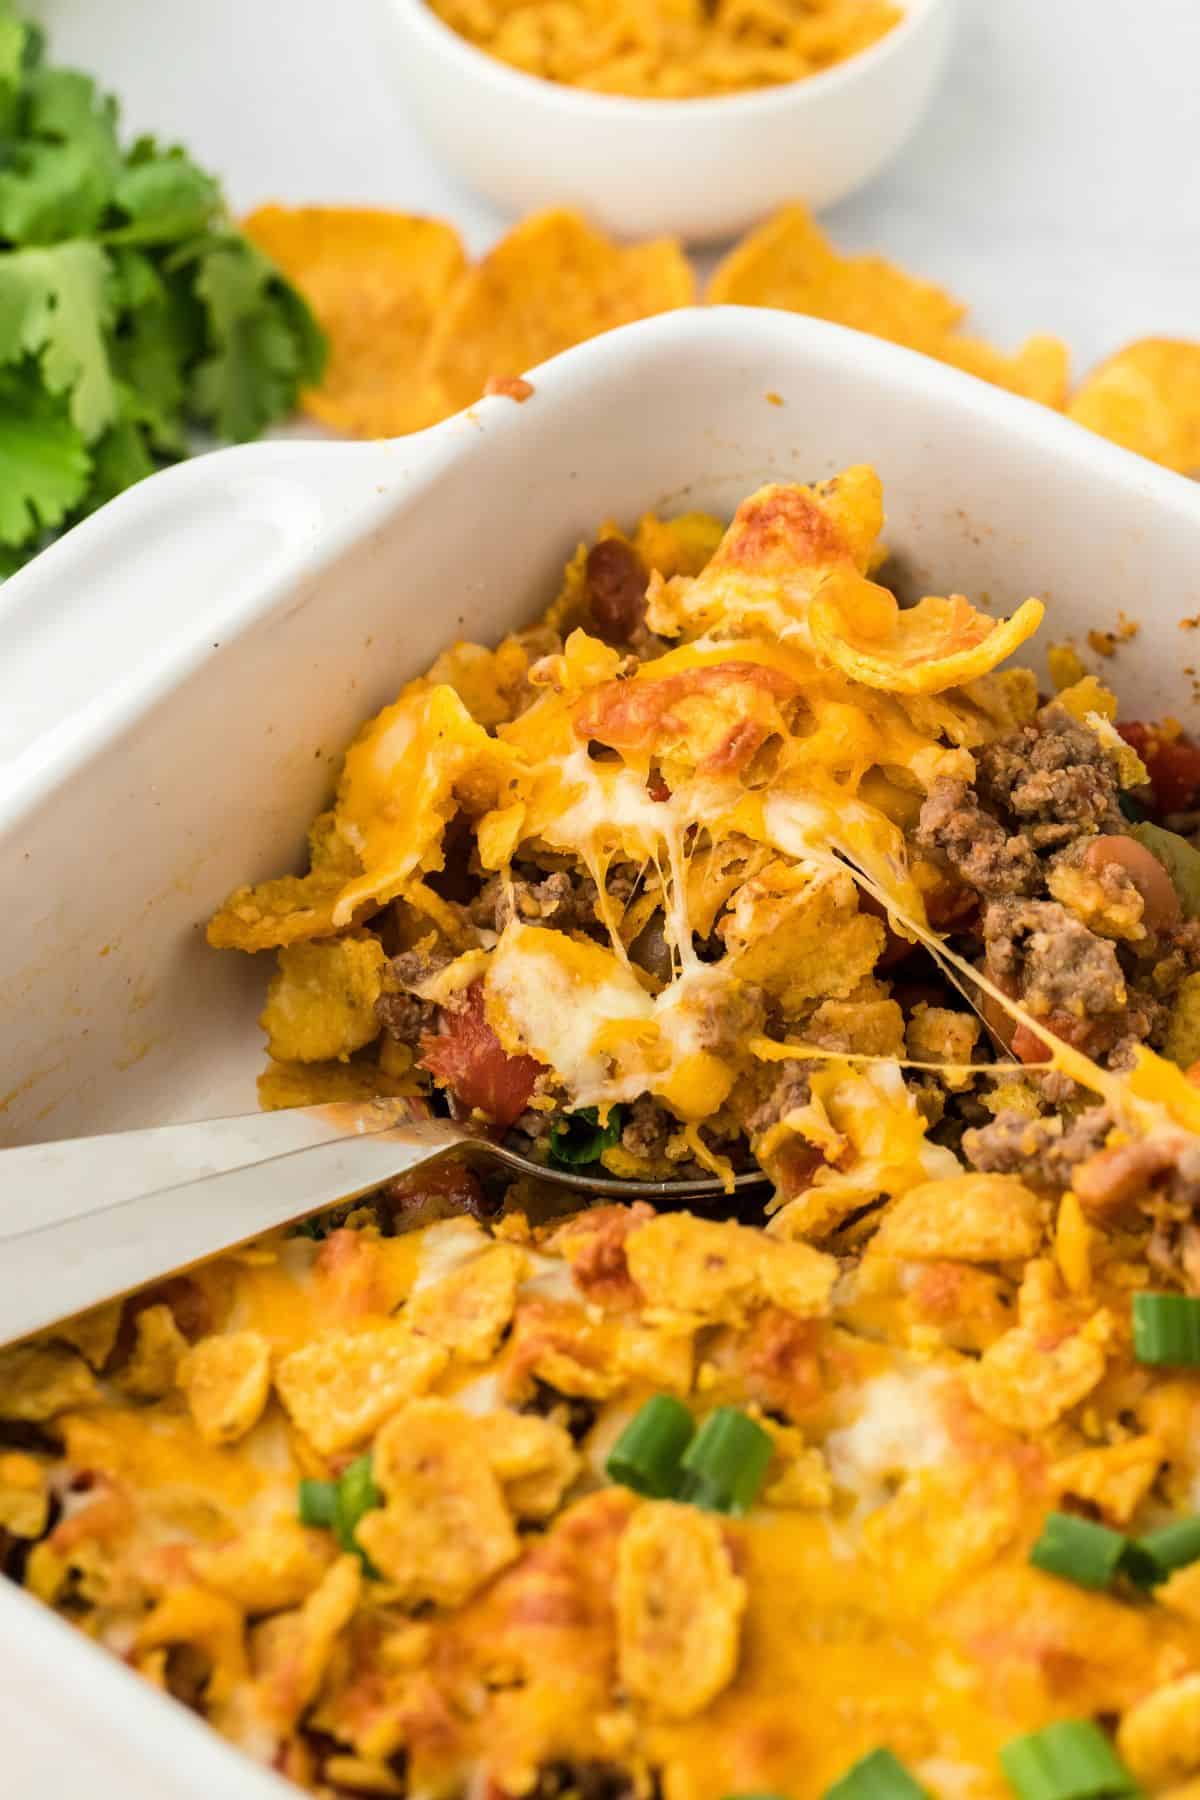 A close-up of a serving of Frito pie being scooped from a casserole dish, showing layers of ground beef, melted cheese, Fritos corn chips, and tomatoes. Fresh cilantro and a bowl of Fritos are in the background